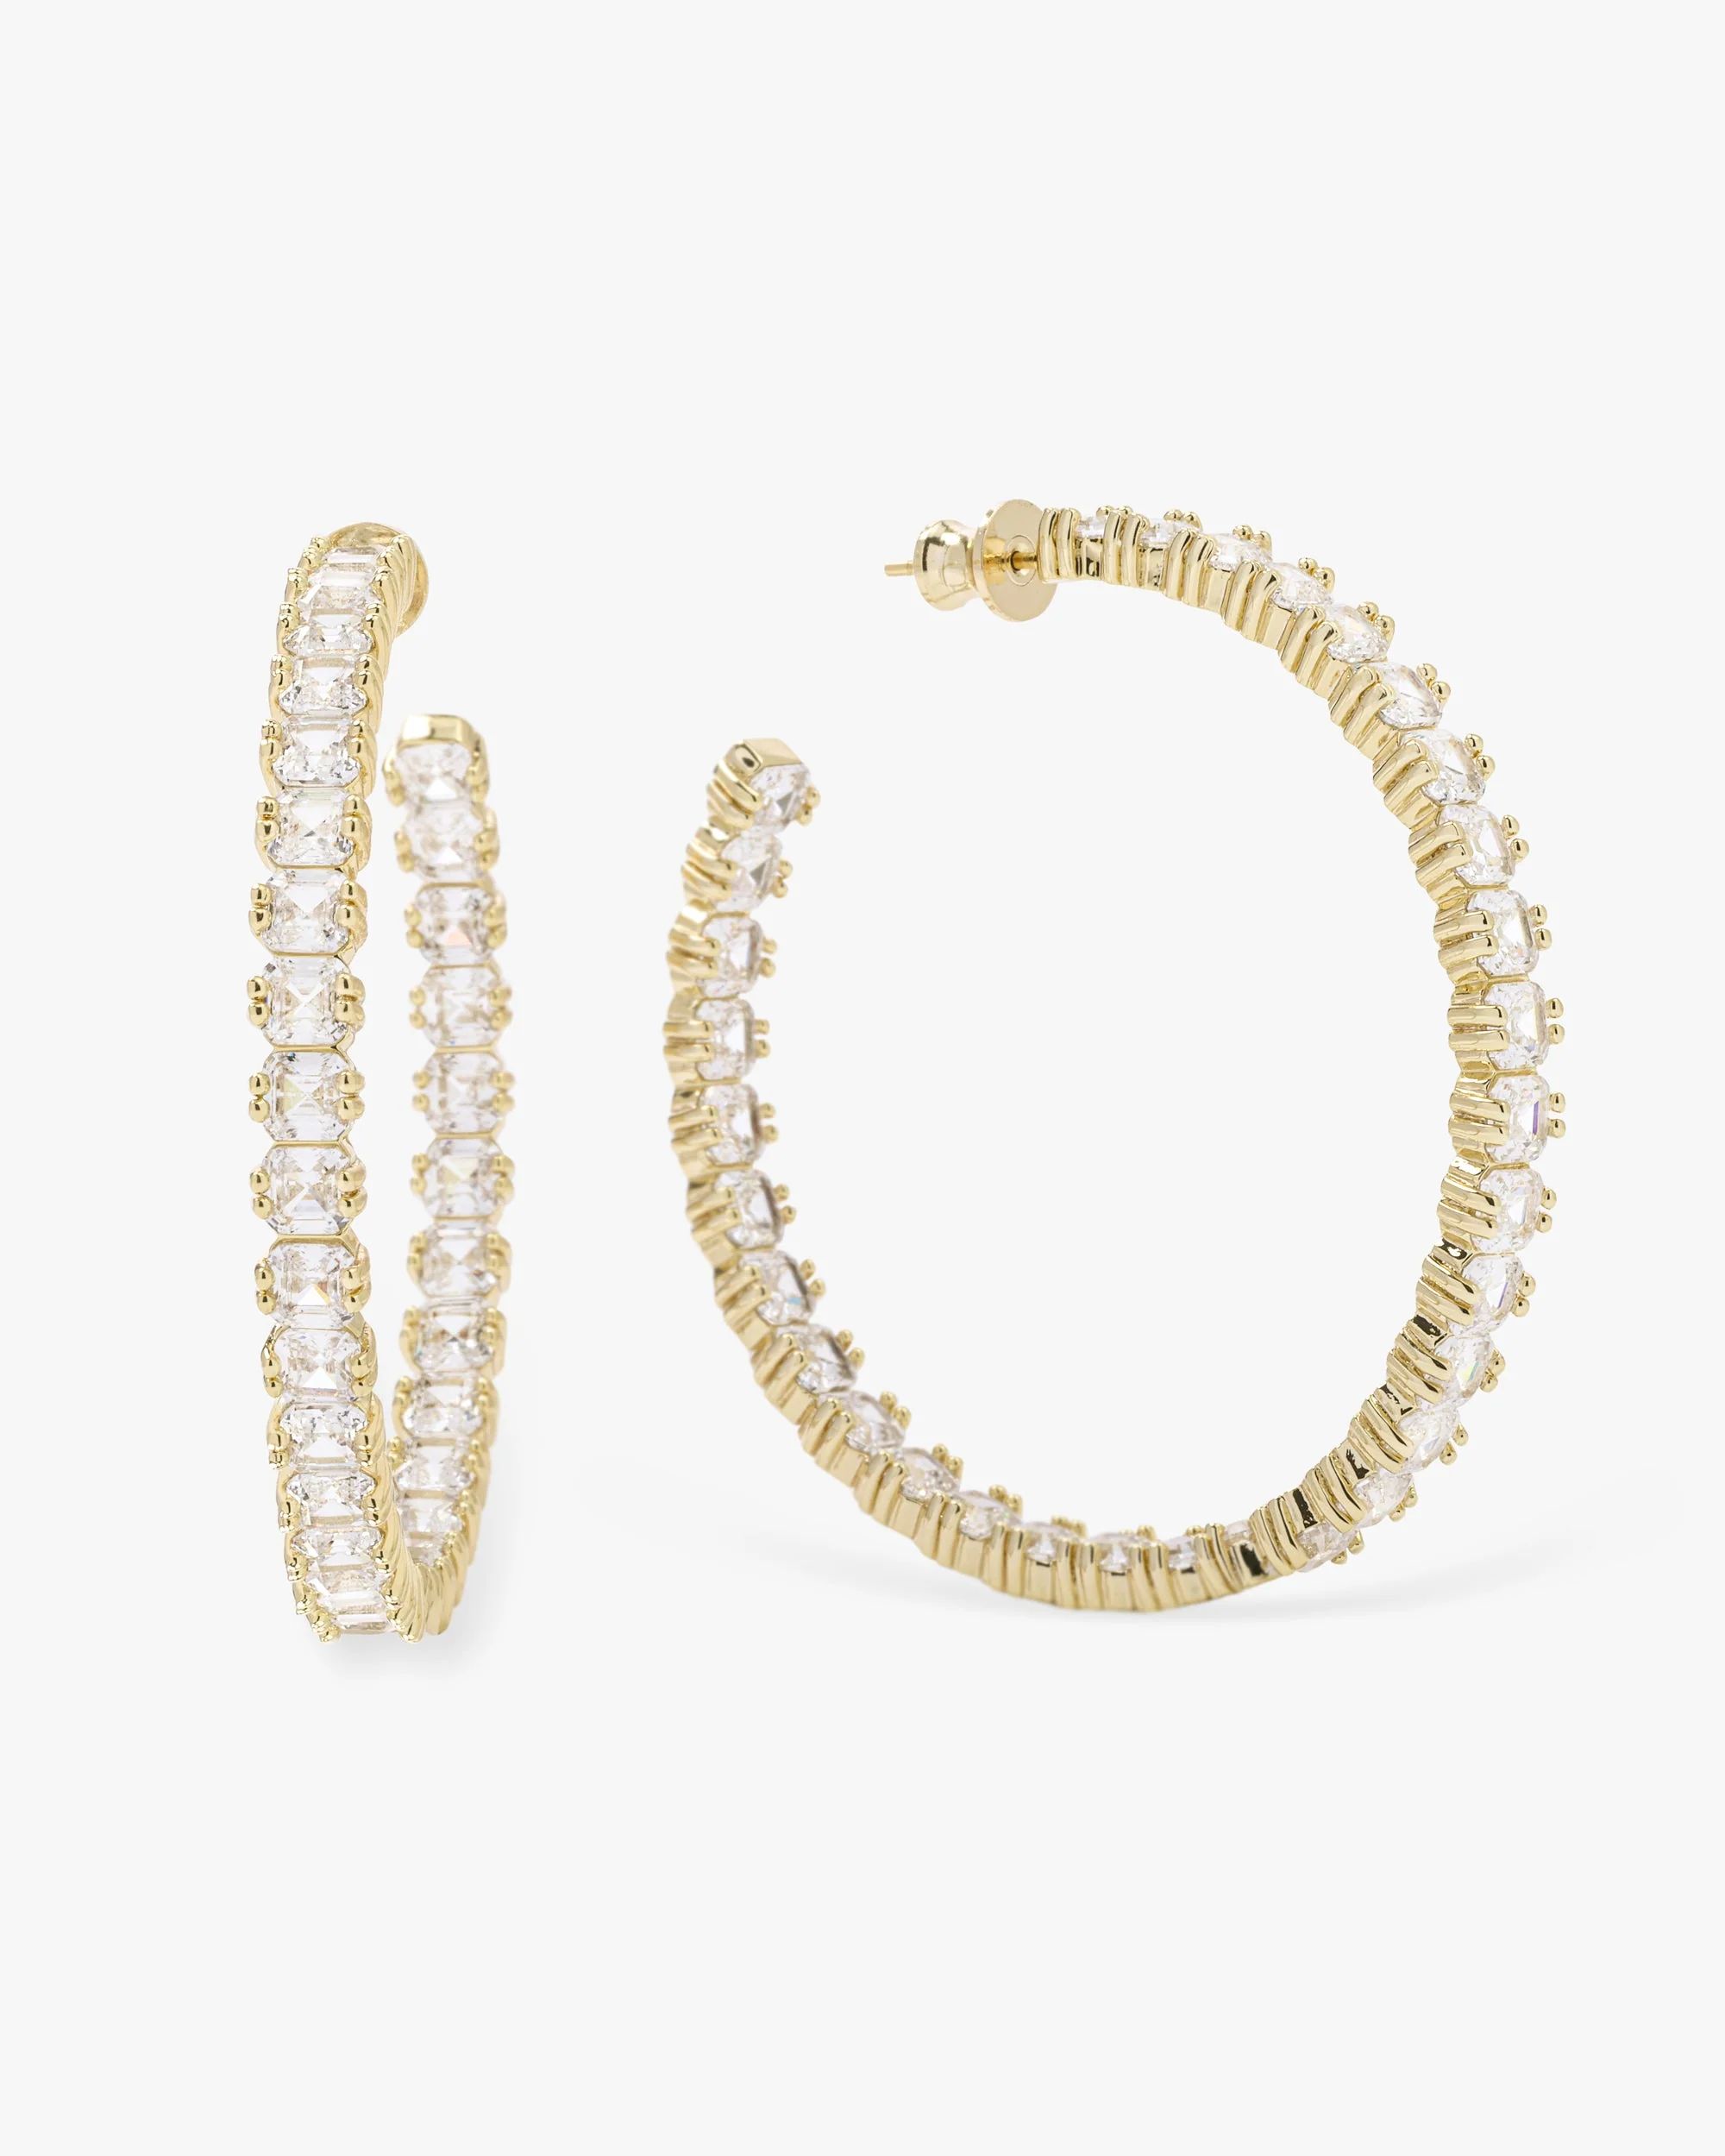 The Queens Hoops 2" - Gold|White Diamondettes | Melinda Maria